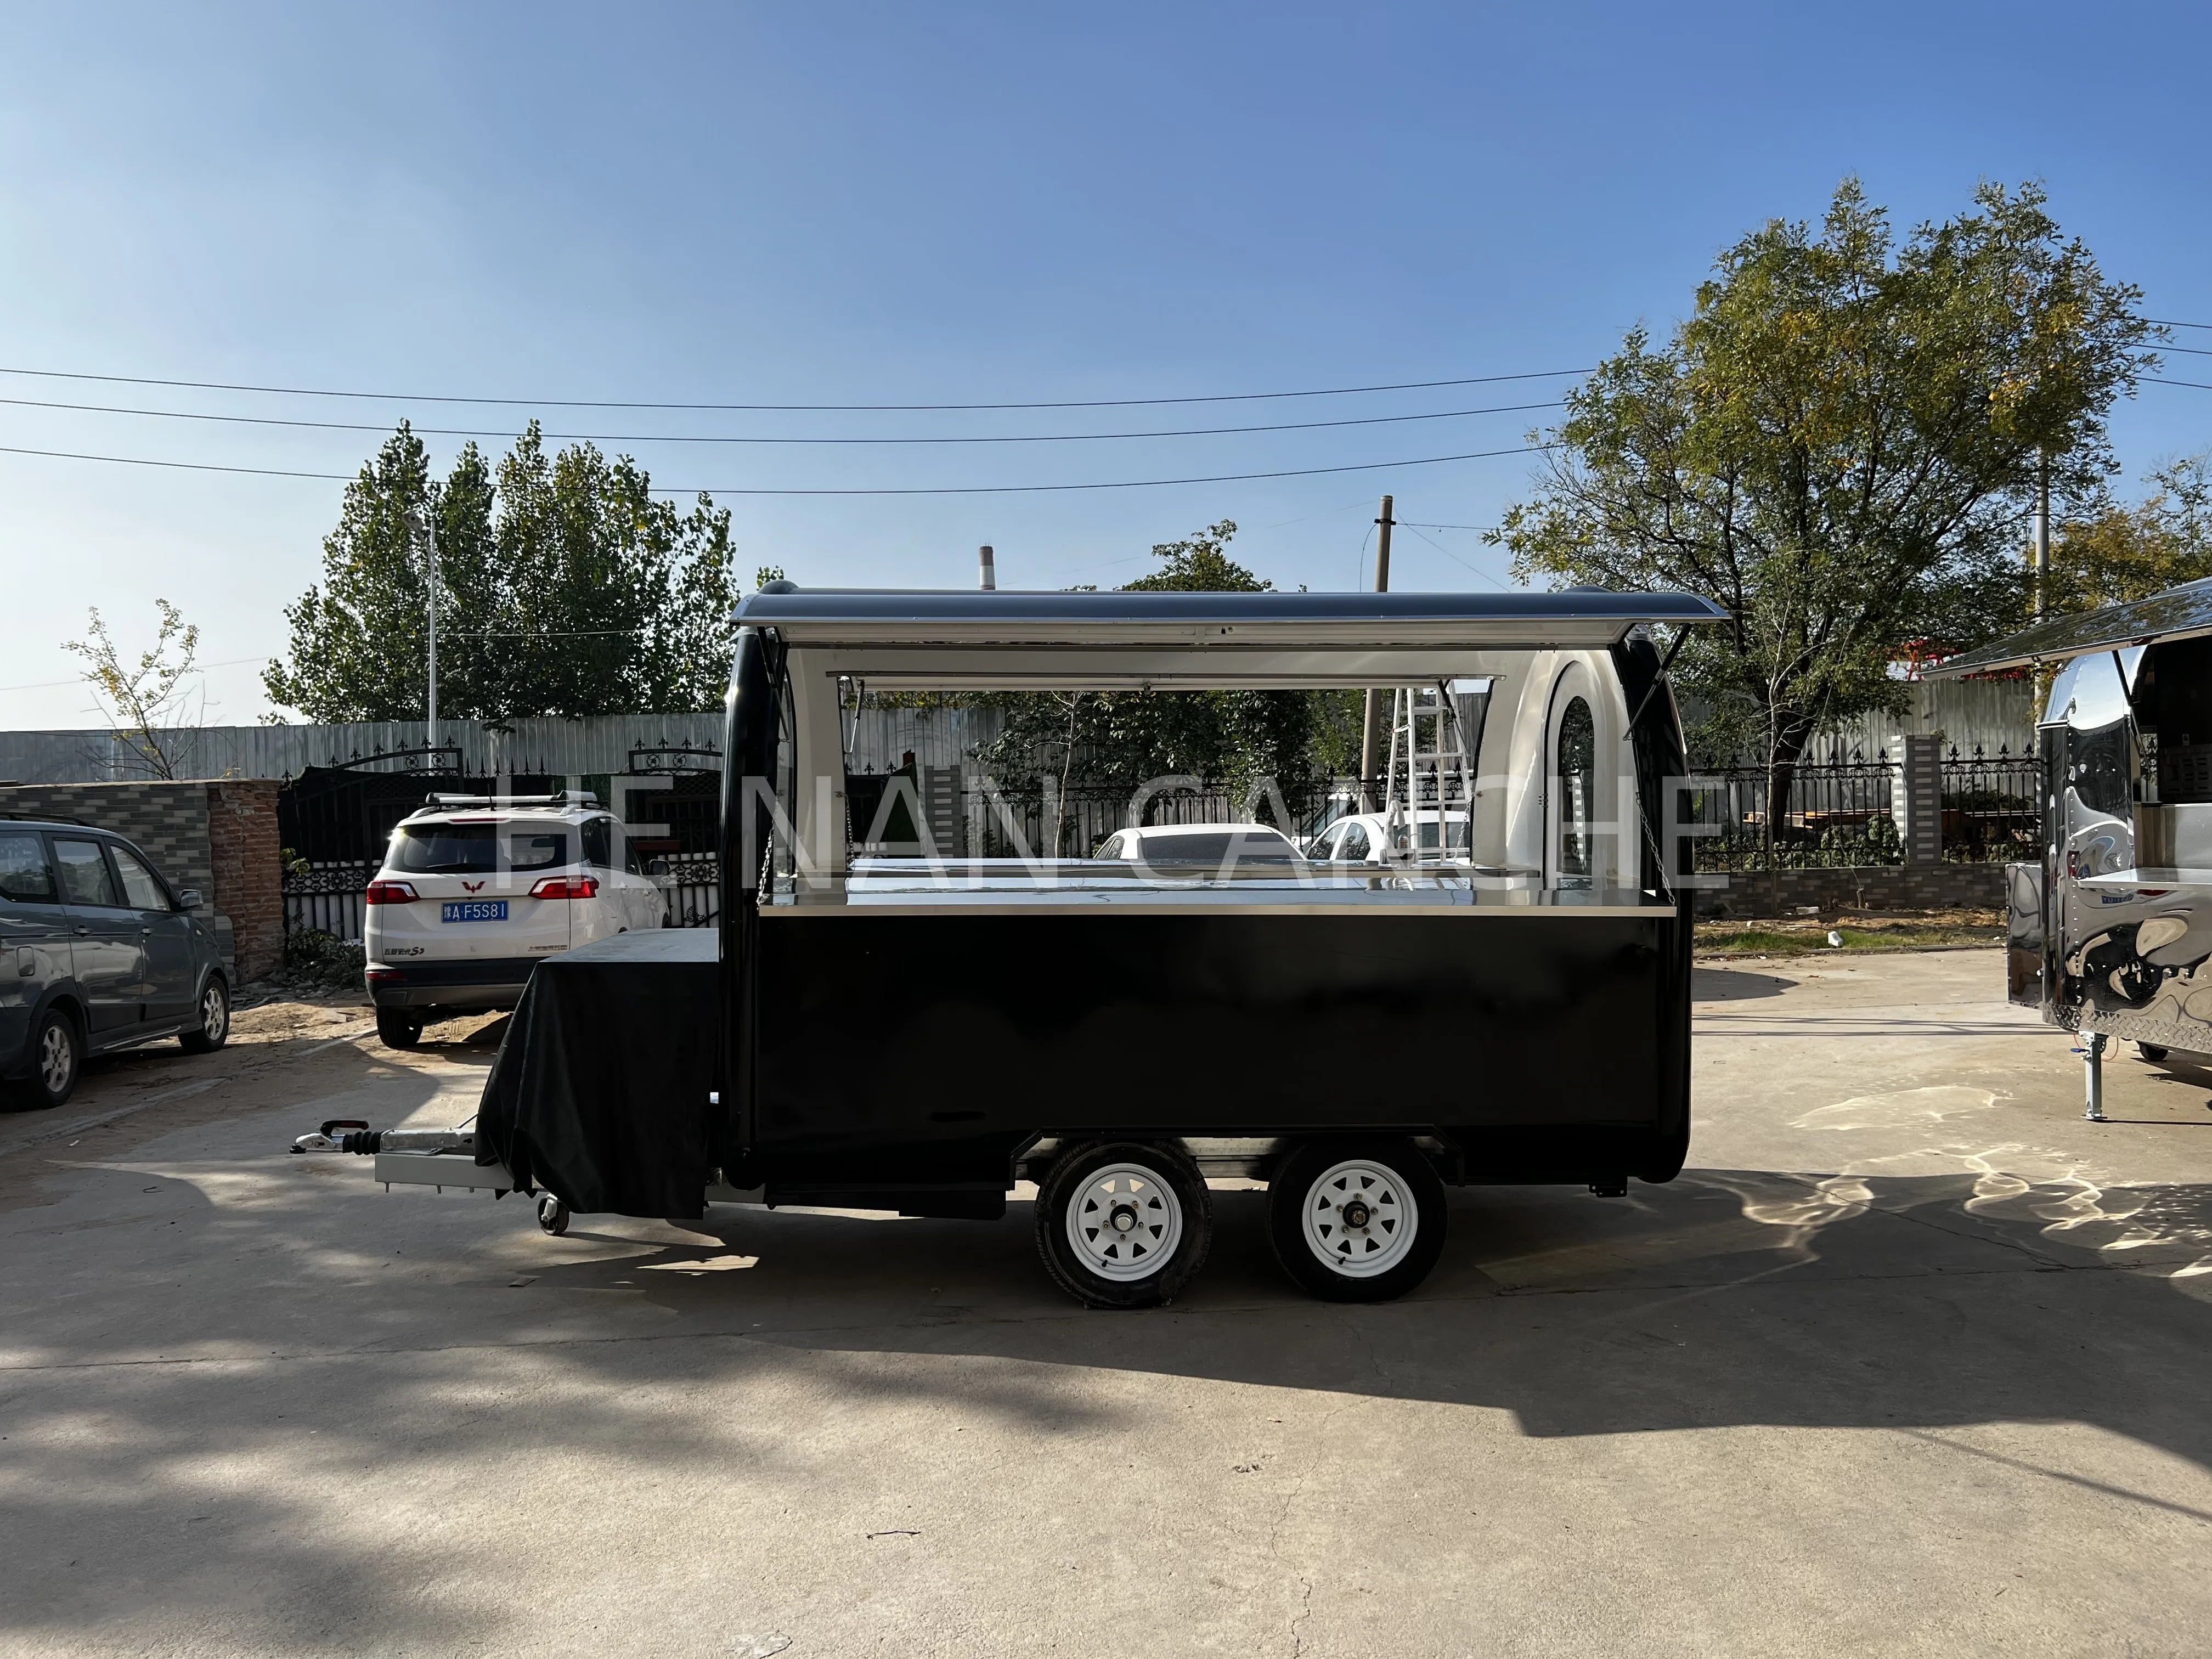 ISO approved American standard street food trailers with 3 sinks, ice cream mobile stalls & hot dog cart italian street food